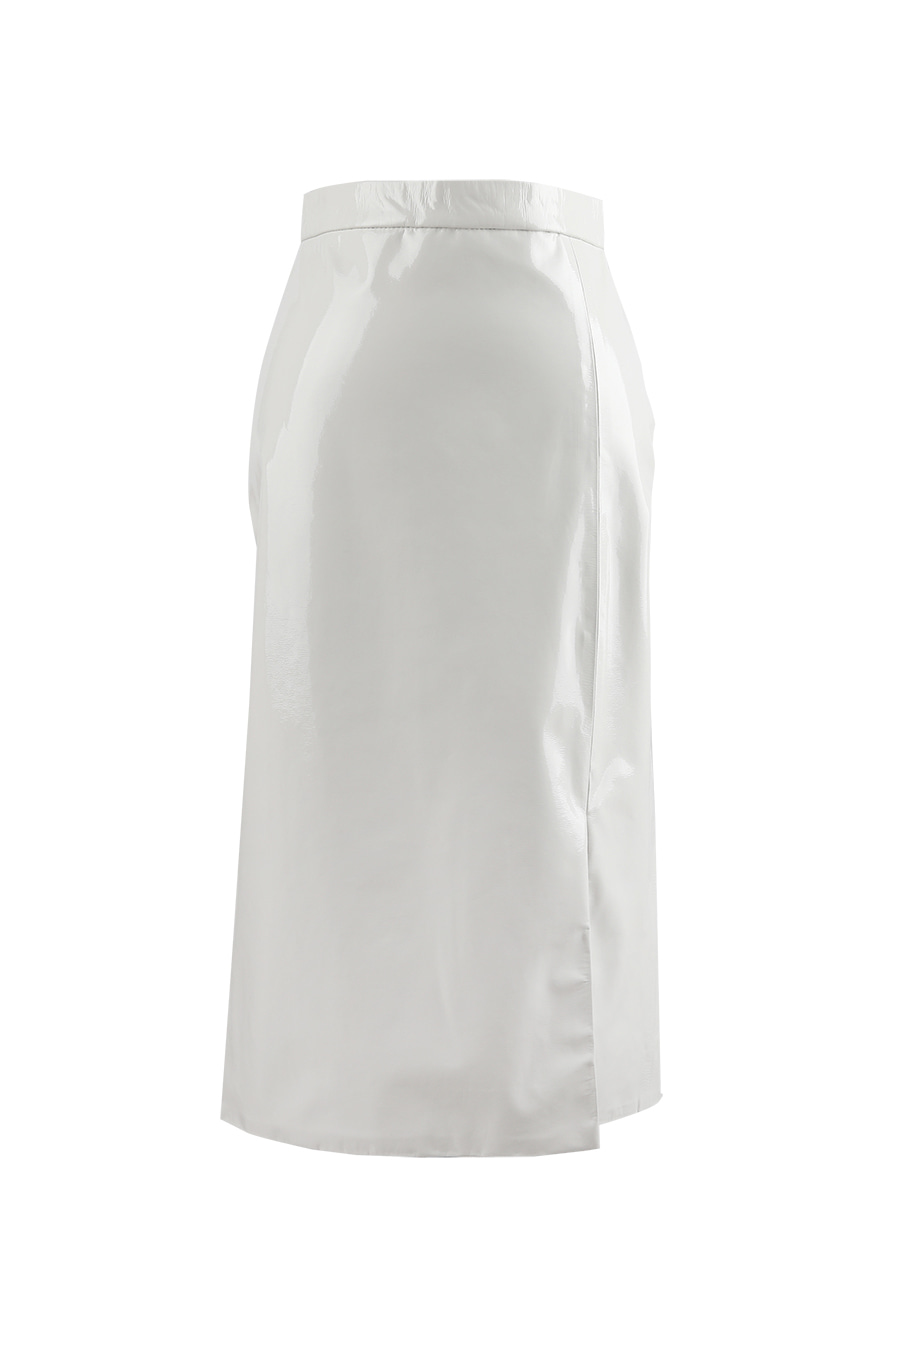 HIGH QUALITY LINE - WHITE LEATHER SKIRT 2019